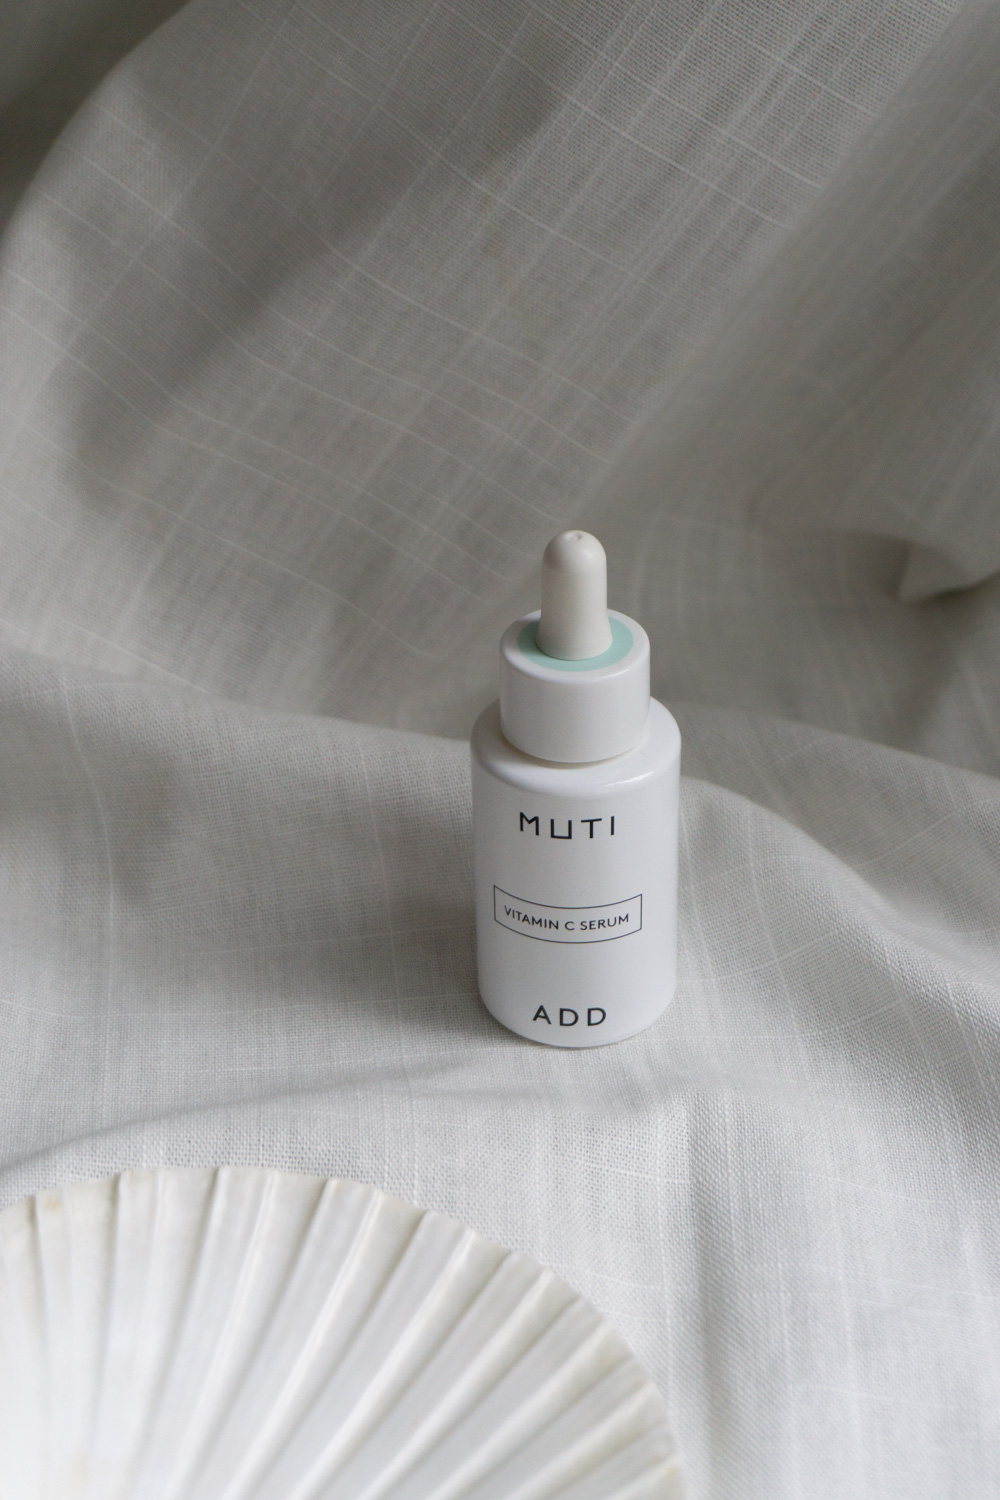 MUTI Minimalist Anti-Age Skincare - Winter Skin Care & Beauty | Product Photography, Packaging Design | RG Daily Blog